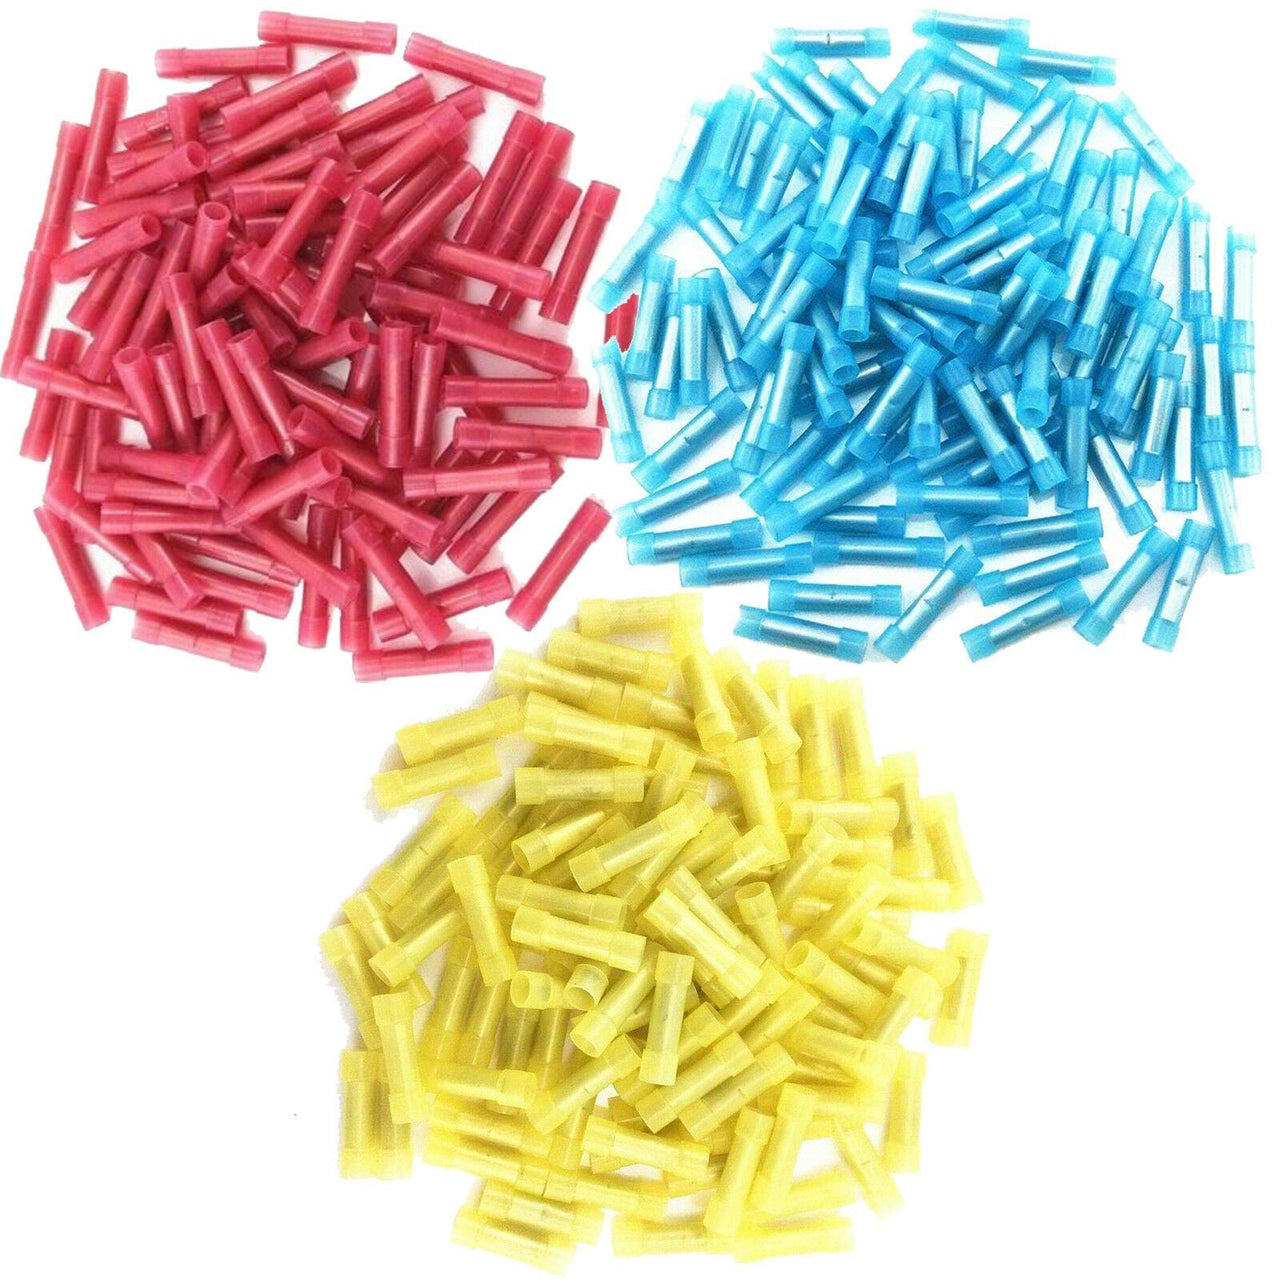 600 Red Blue Yellow Nylon Butt Connector 22-18 16-14 12-10 AWG Gauge Insulated